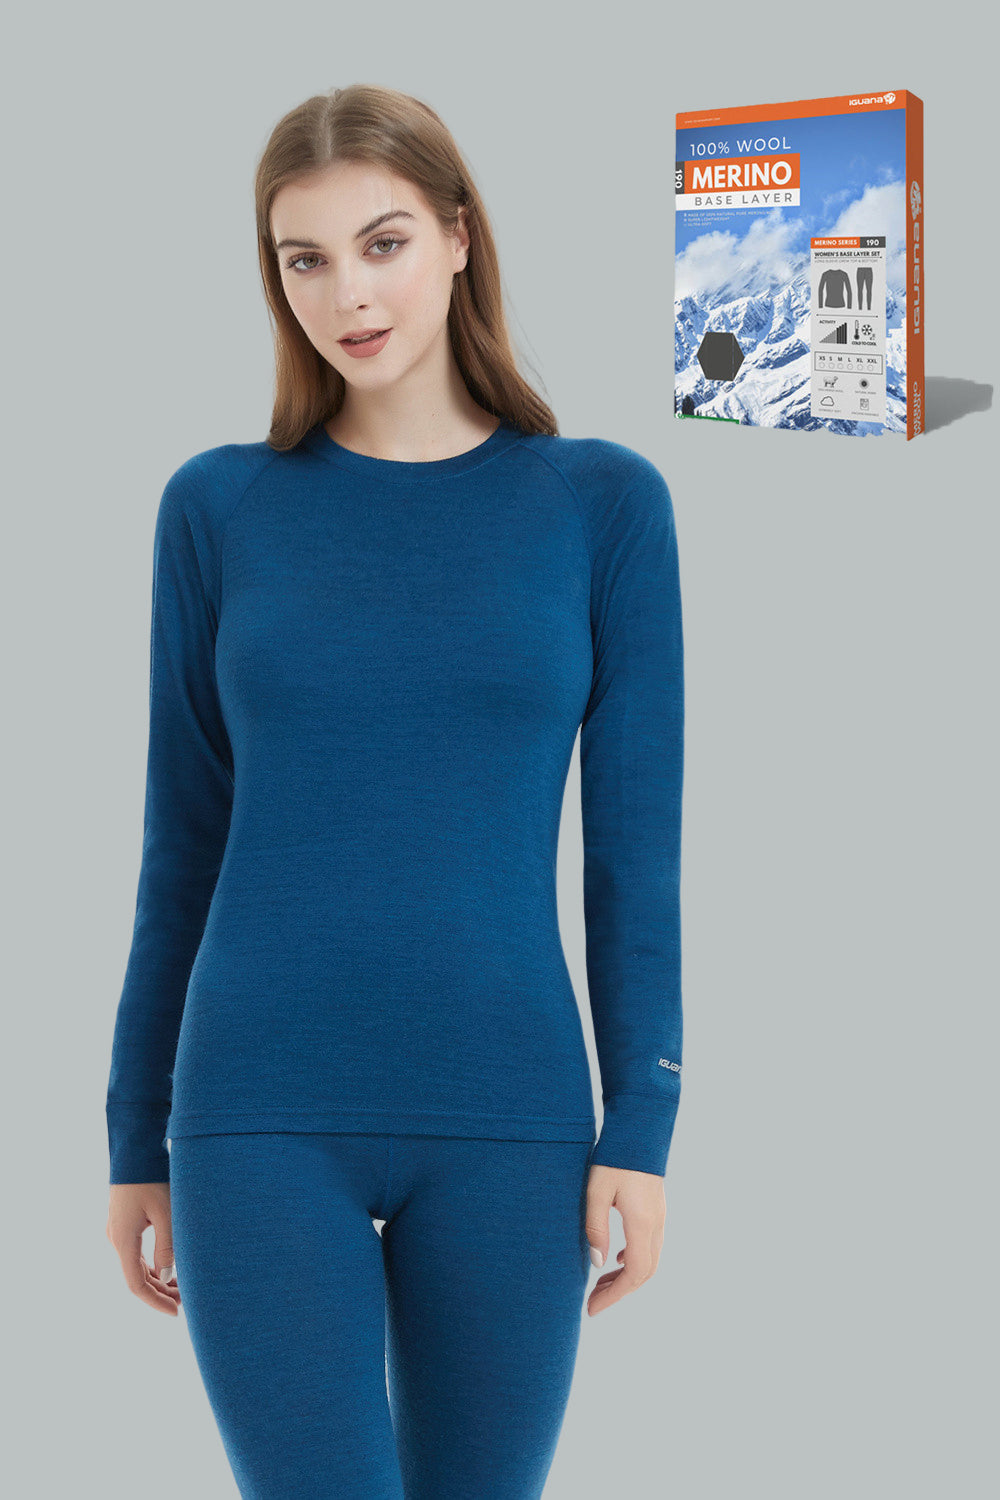 Wholesale merino wool base layer women For Comfort And Warmth In Style 